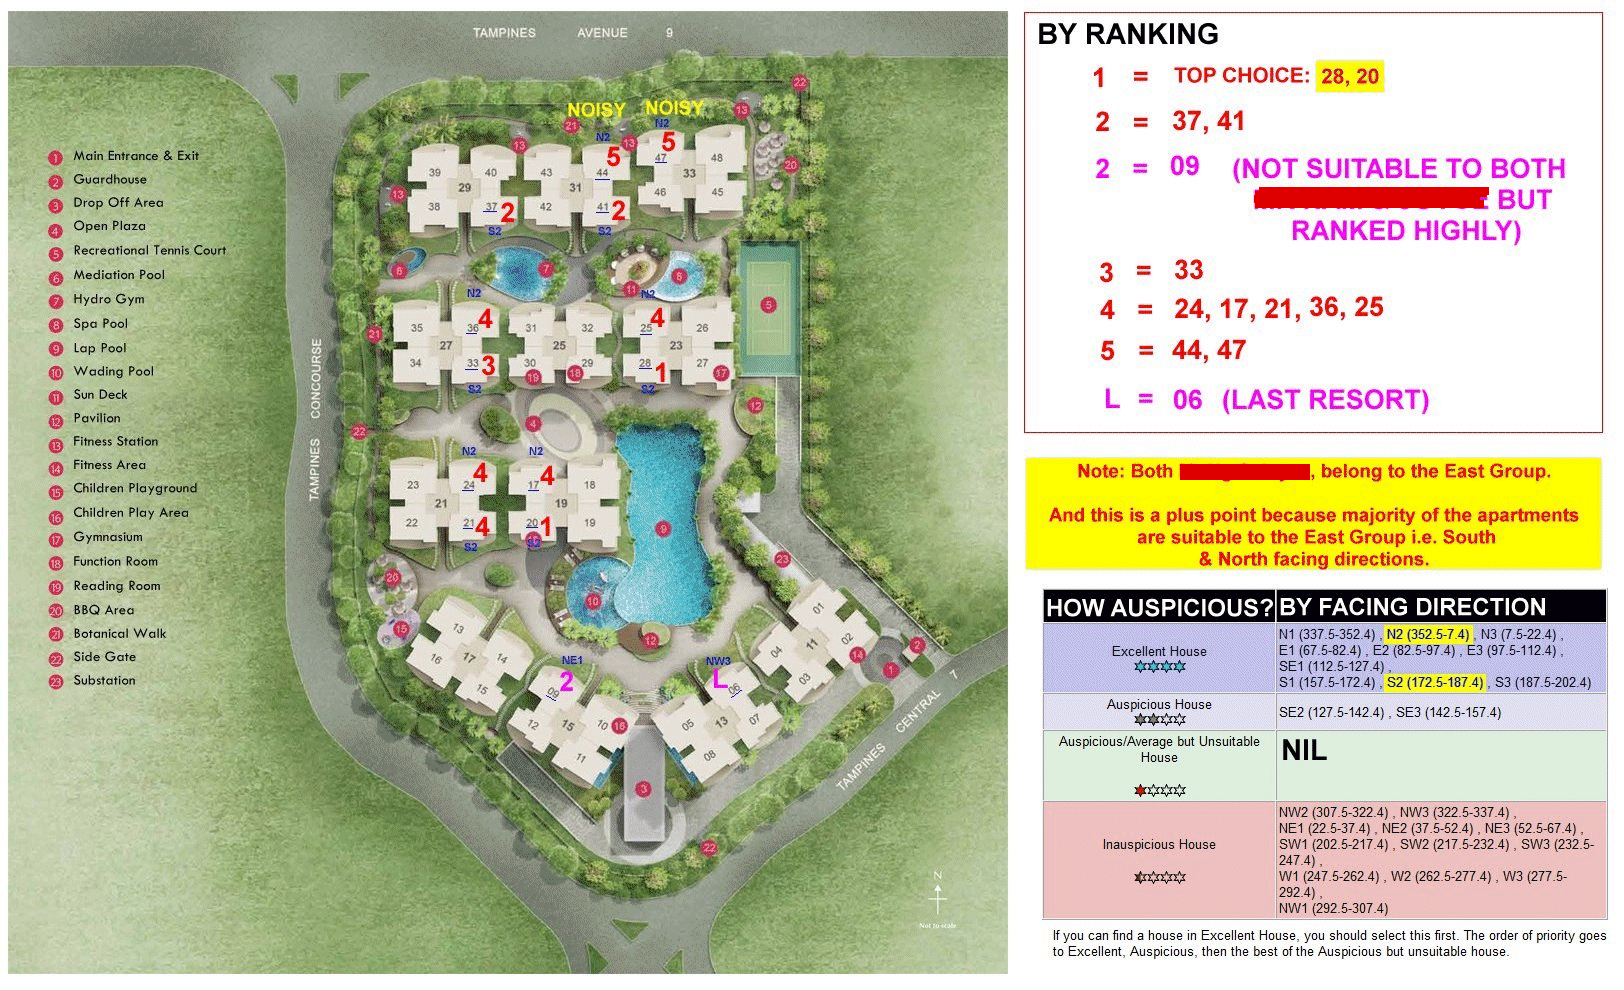 Tampines Trilliant by ranking Singapore Property Review